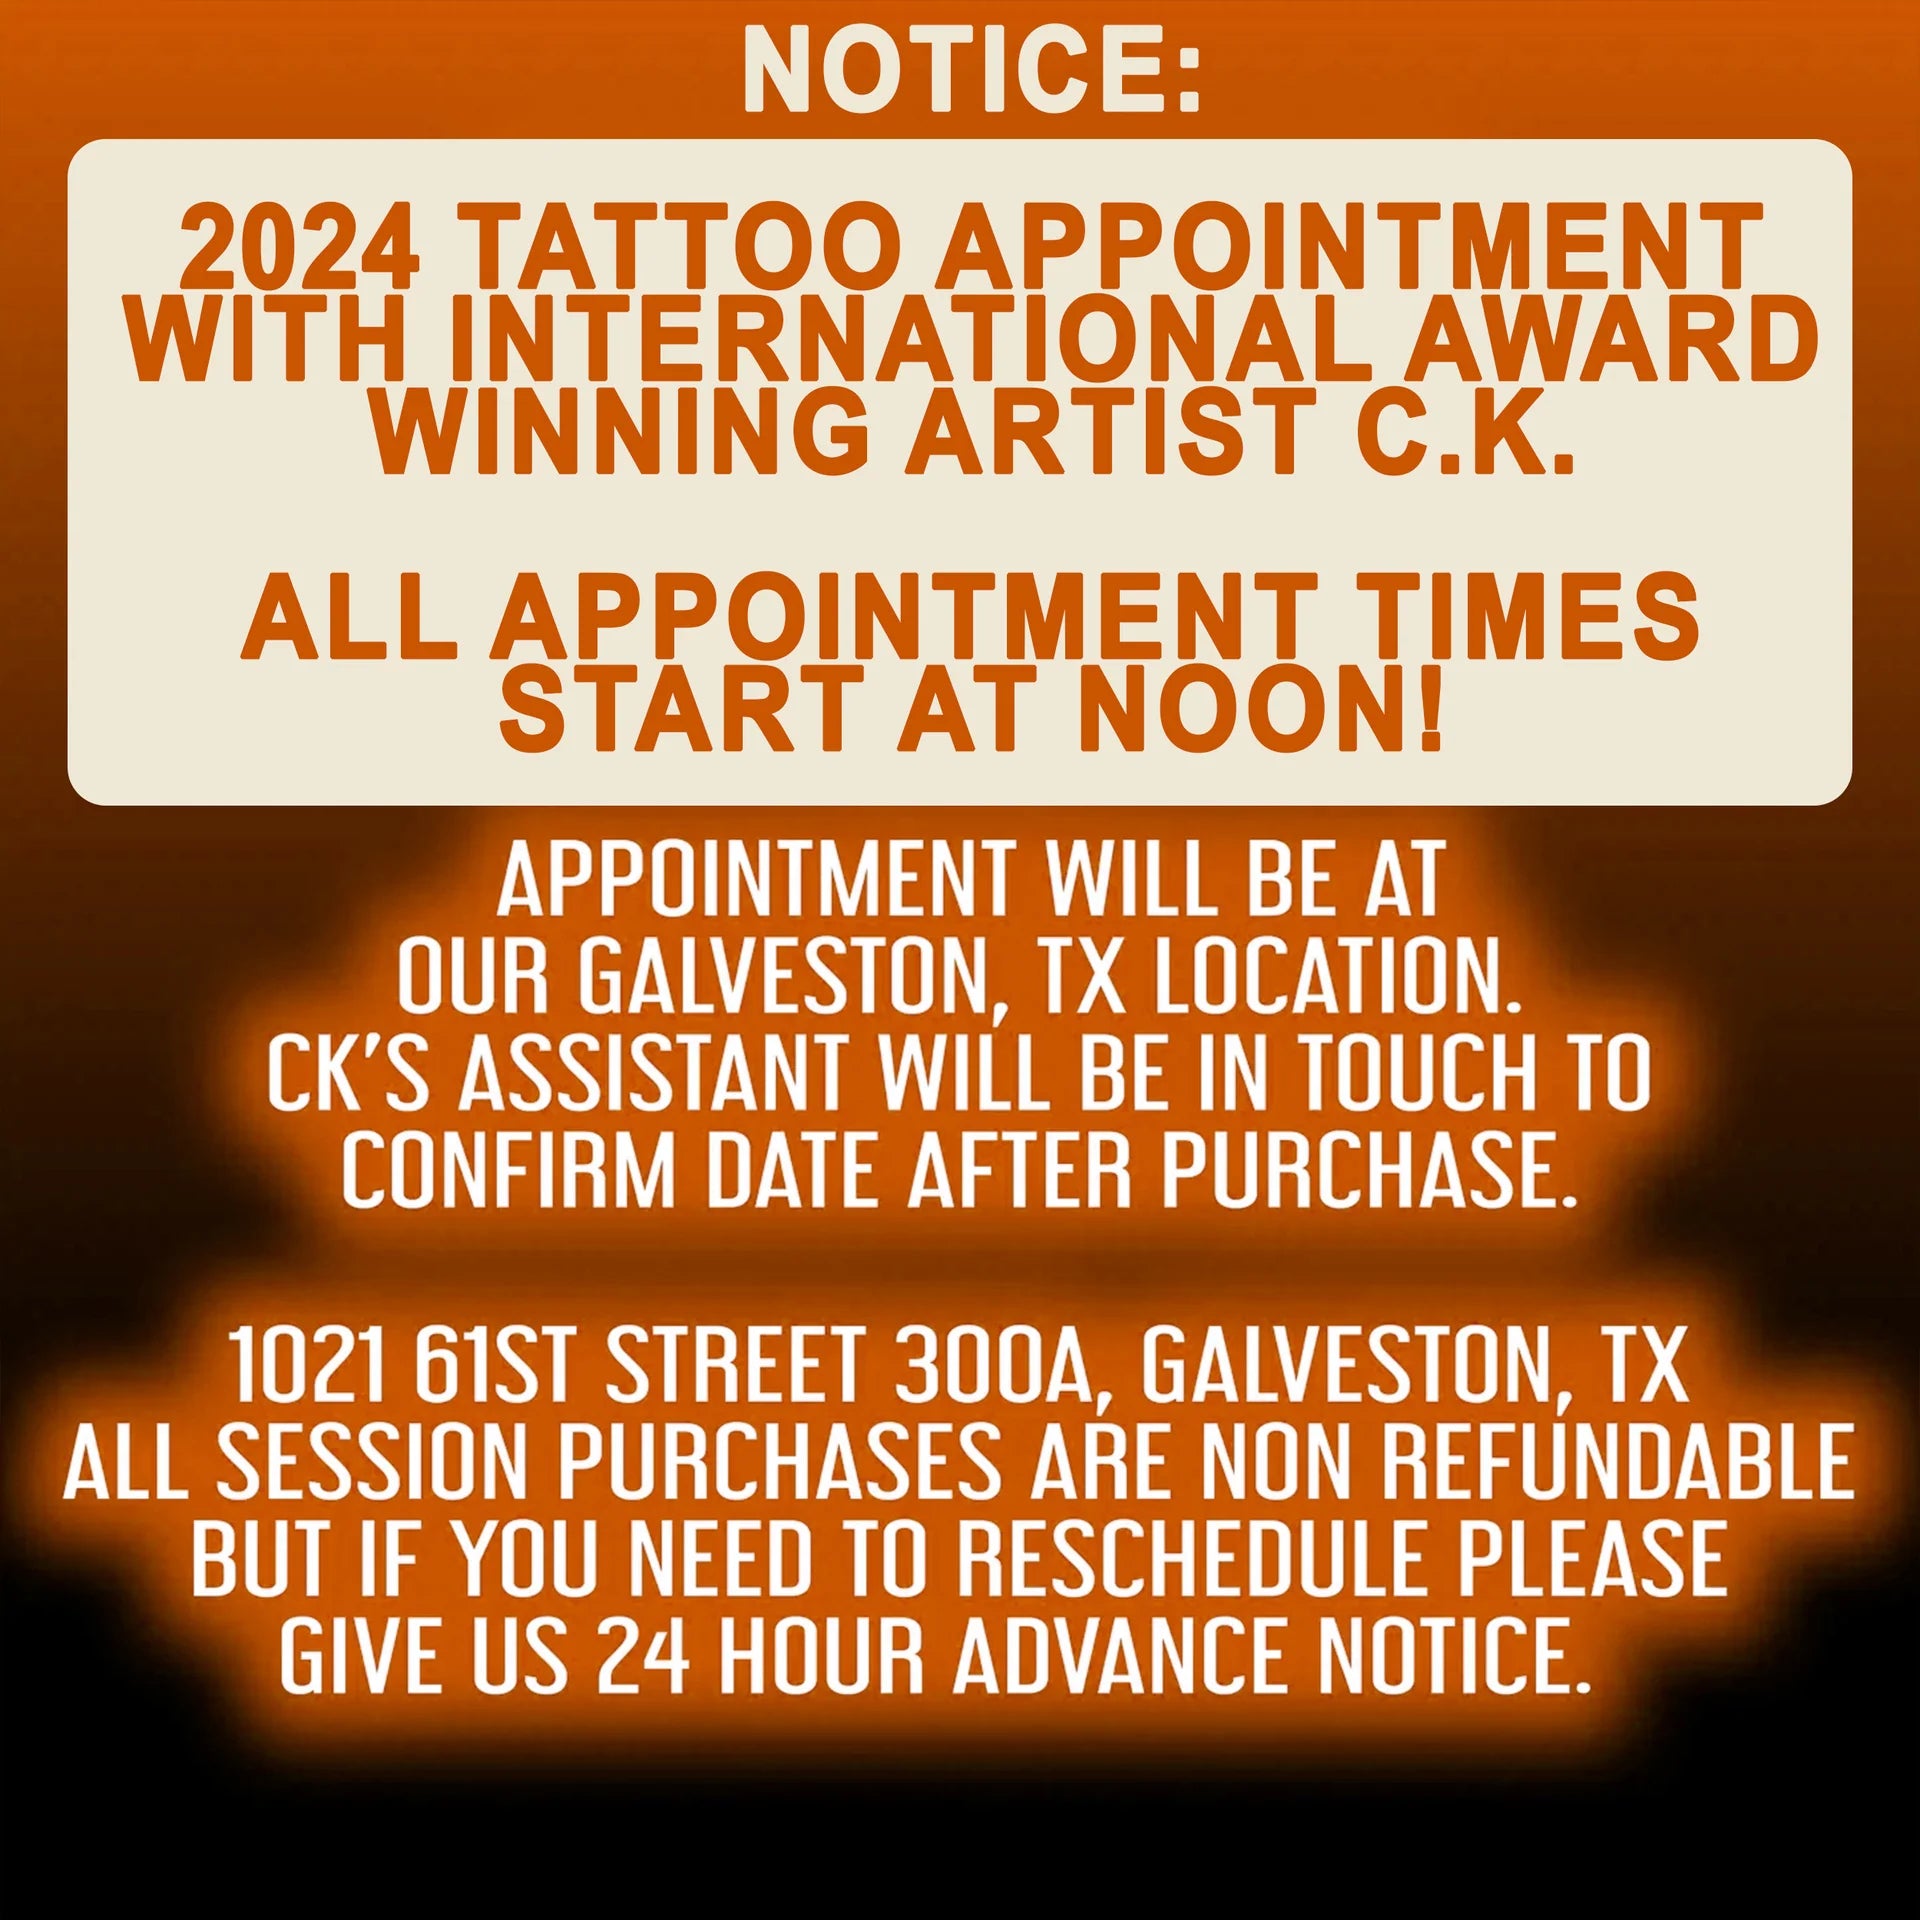 6 hour Tattoo Session with CK June 25th, 2024